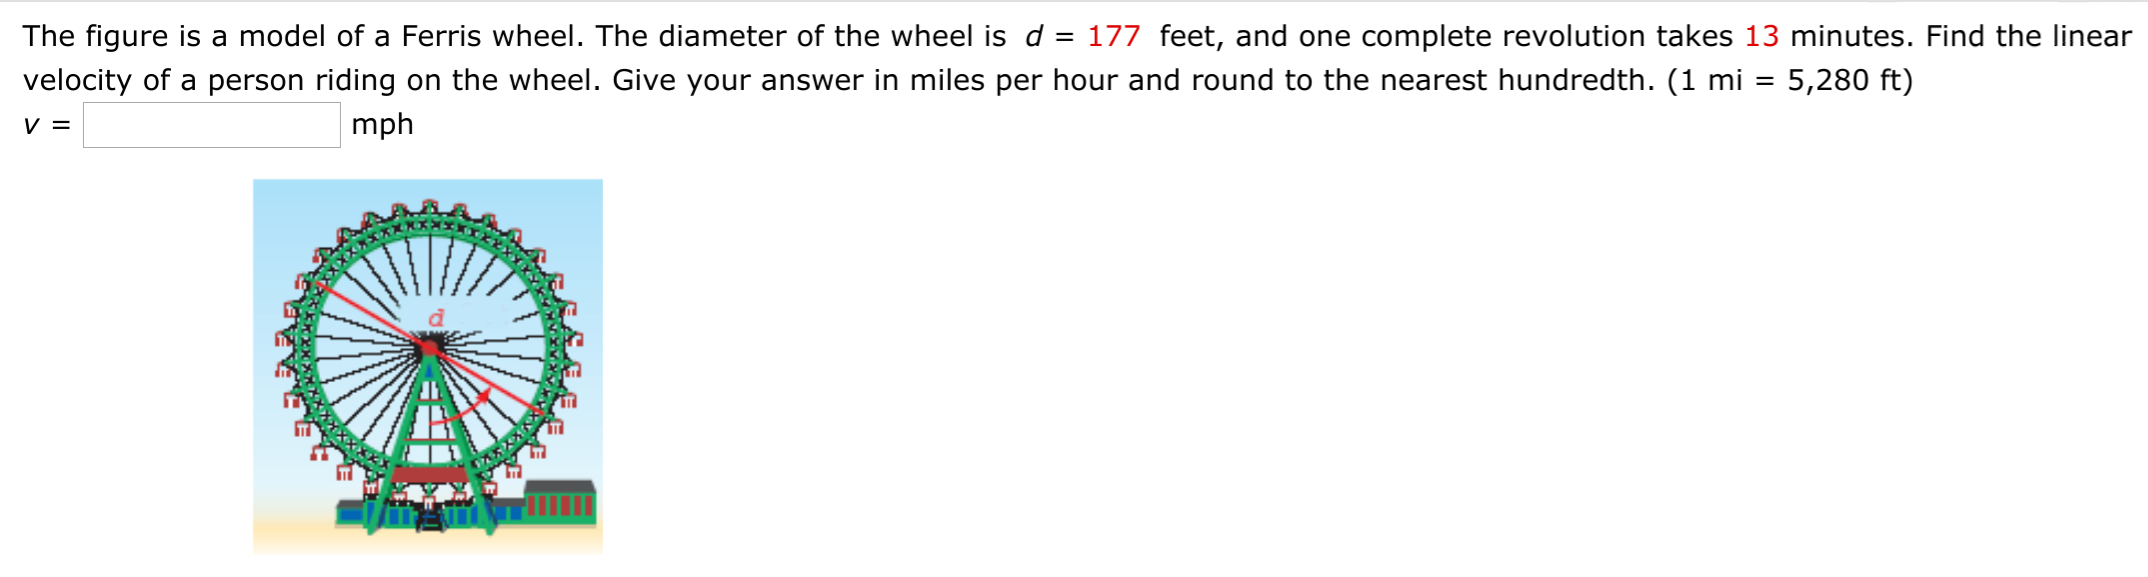 The figure is a model of a Ferris wheel. The diameter of the wheel is d = 177 feet, and one complete revolution takes 13 minutes. Find the linear
velocity of a person riding on the wheel. Give your answer in miles per hour and round to the nearest hundredth. (1 mi = 5,280 ft)
mph
